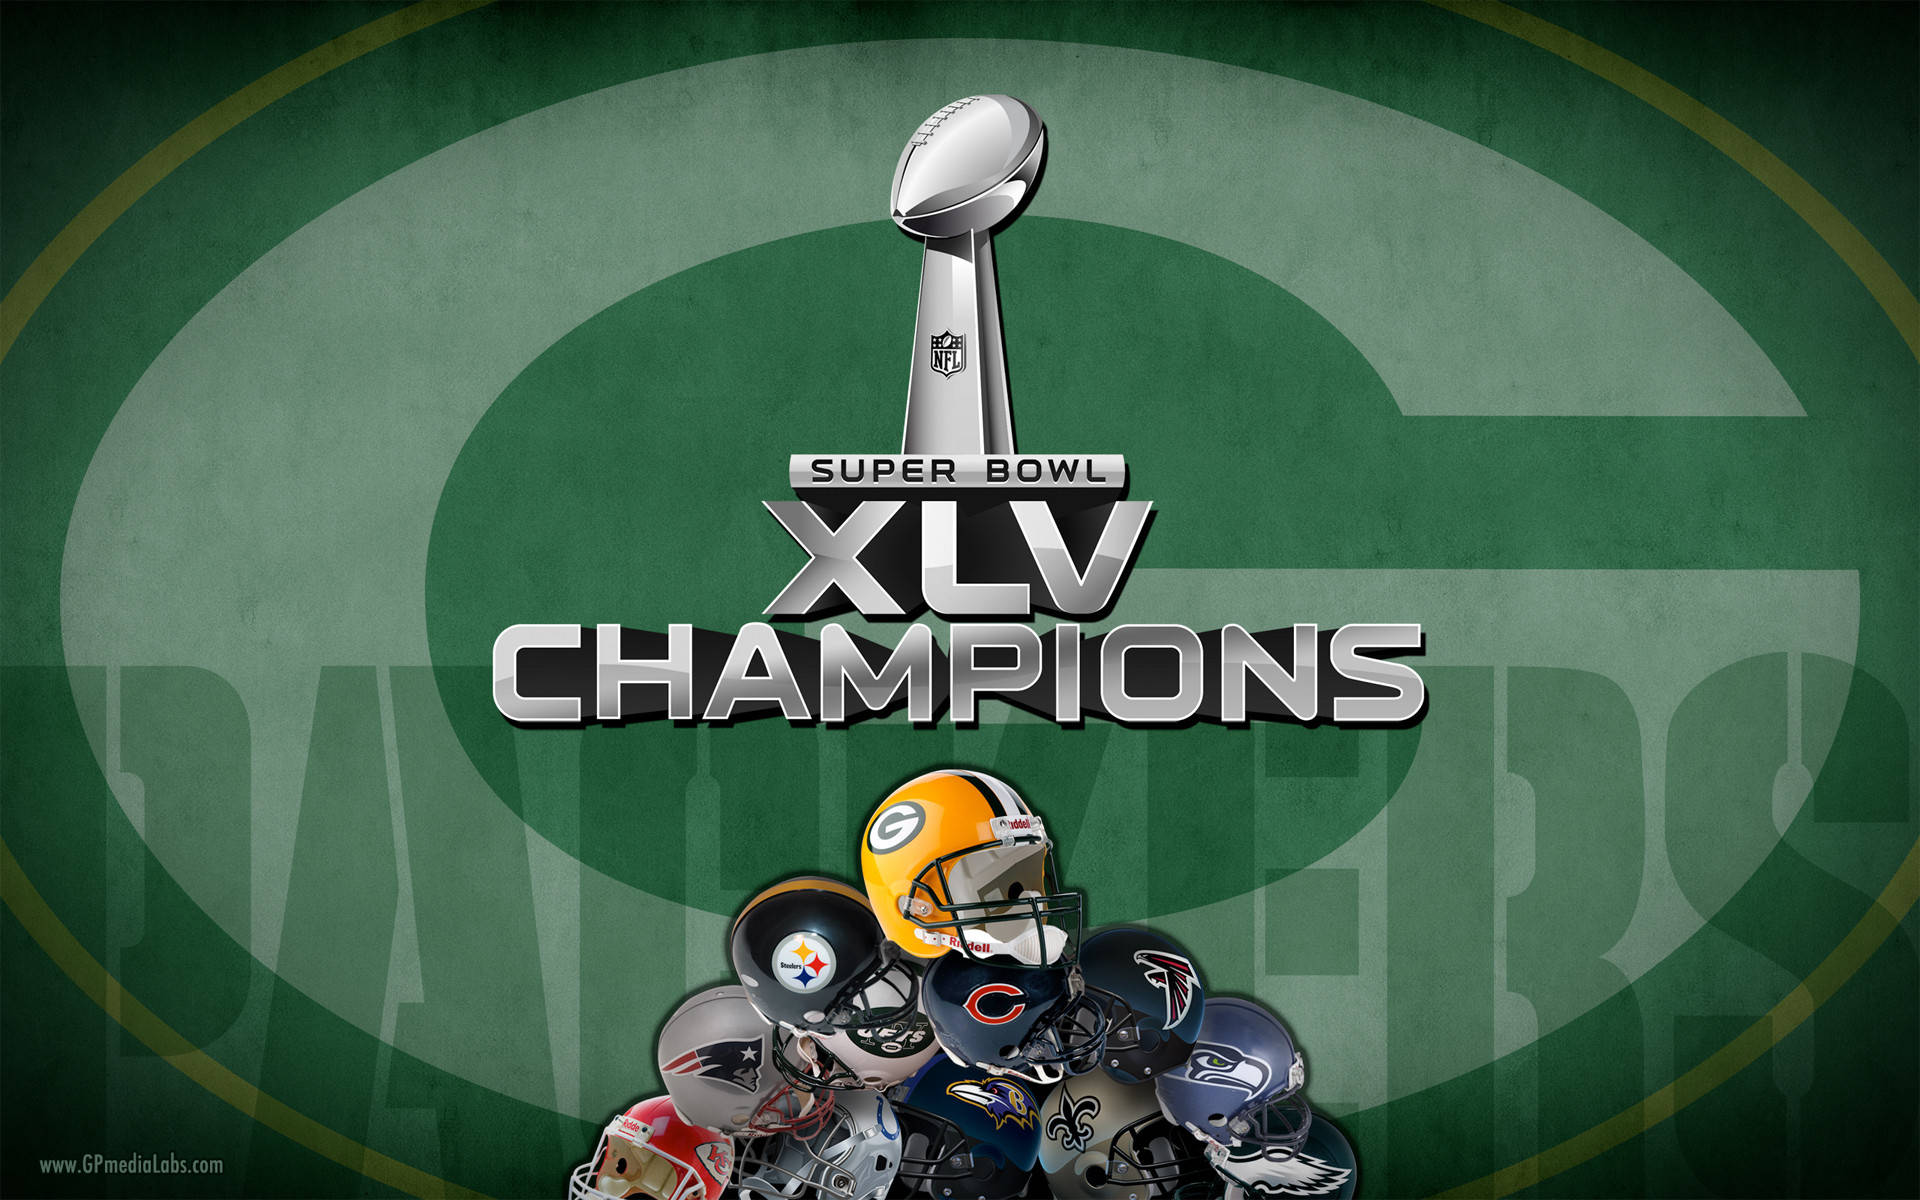 Celebrating Champions - The Green Bay Packers Triumph in the Super Bowl Wallpaper